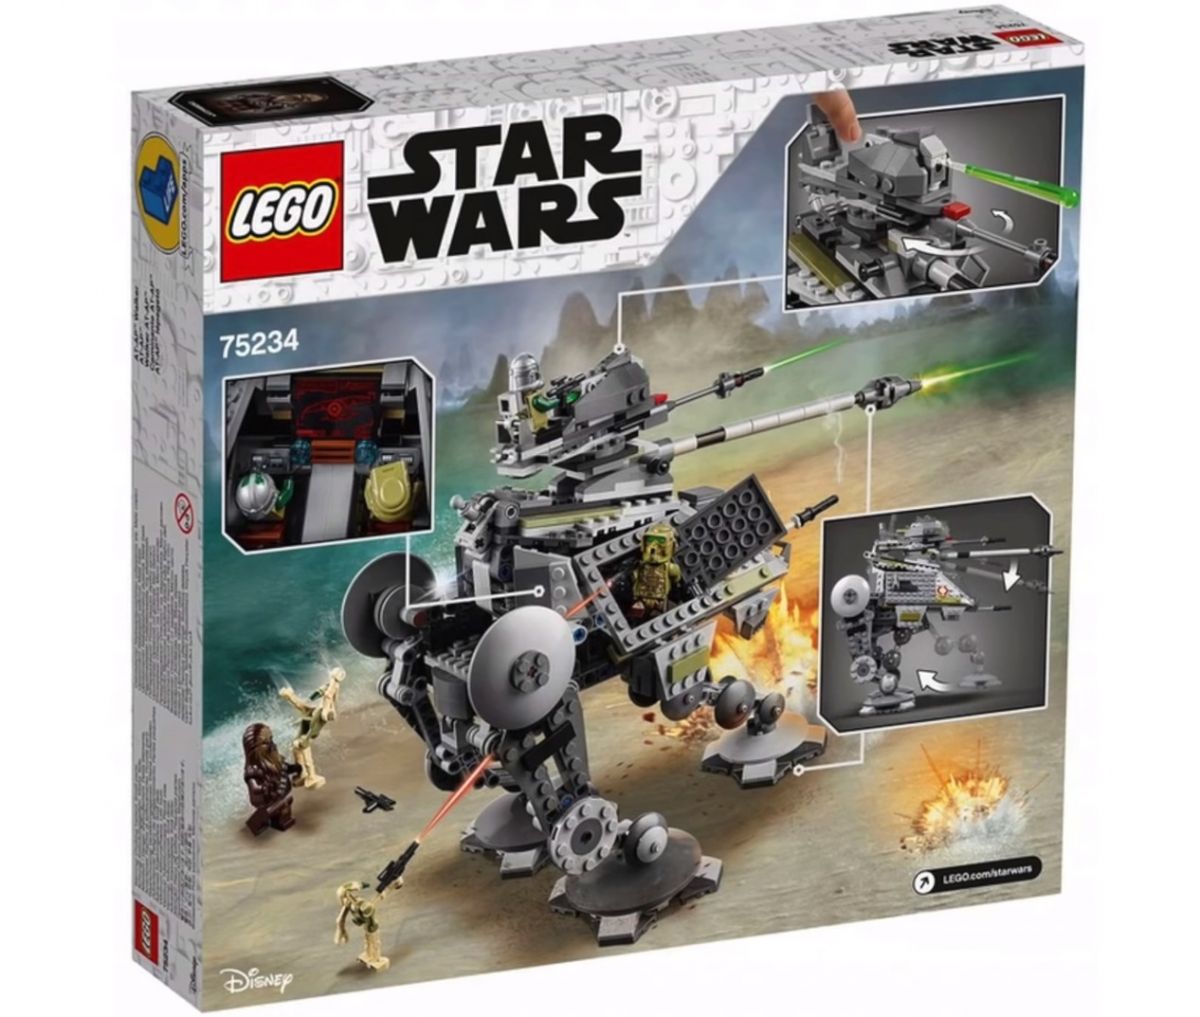 drivhus Billy Tag telefonen New 2019 LEGO Star Wars Sets Leaked! | Geek Culture